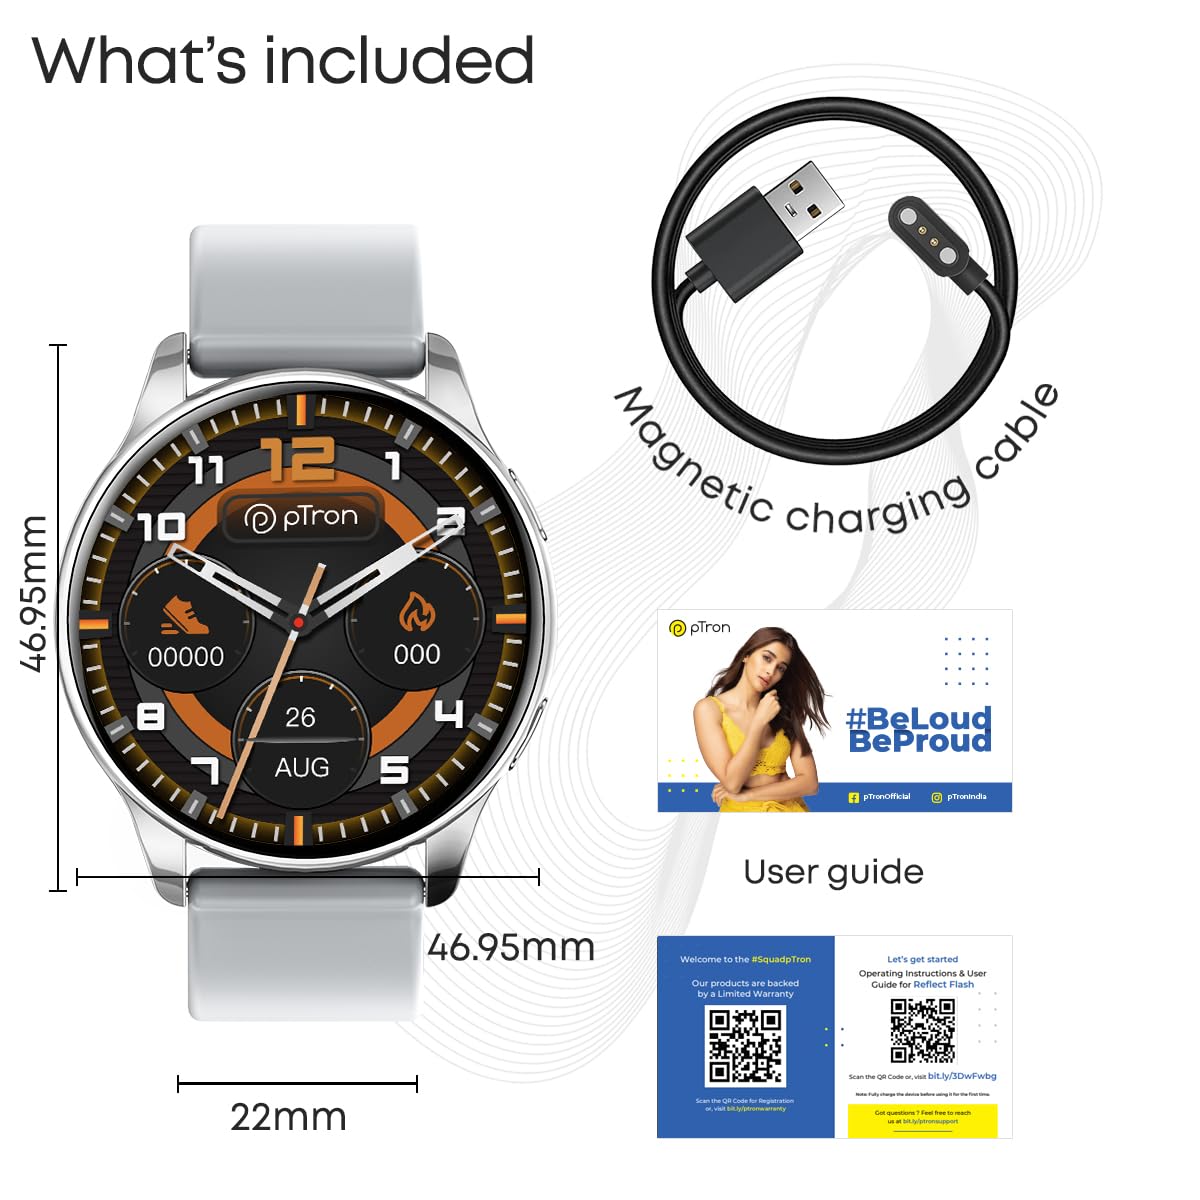 pTron Newly Launched Reflect Flash 1.32 inch Round Dial Smartwatch, Bluetooth Calling, Full Touch Display, 600 NITS, Metal Frame, 100+ Watch Faces, HR, SpO2, Voice Assist & 5 Days Battery Life(Silver)